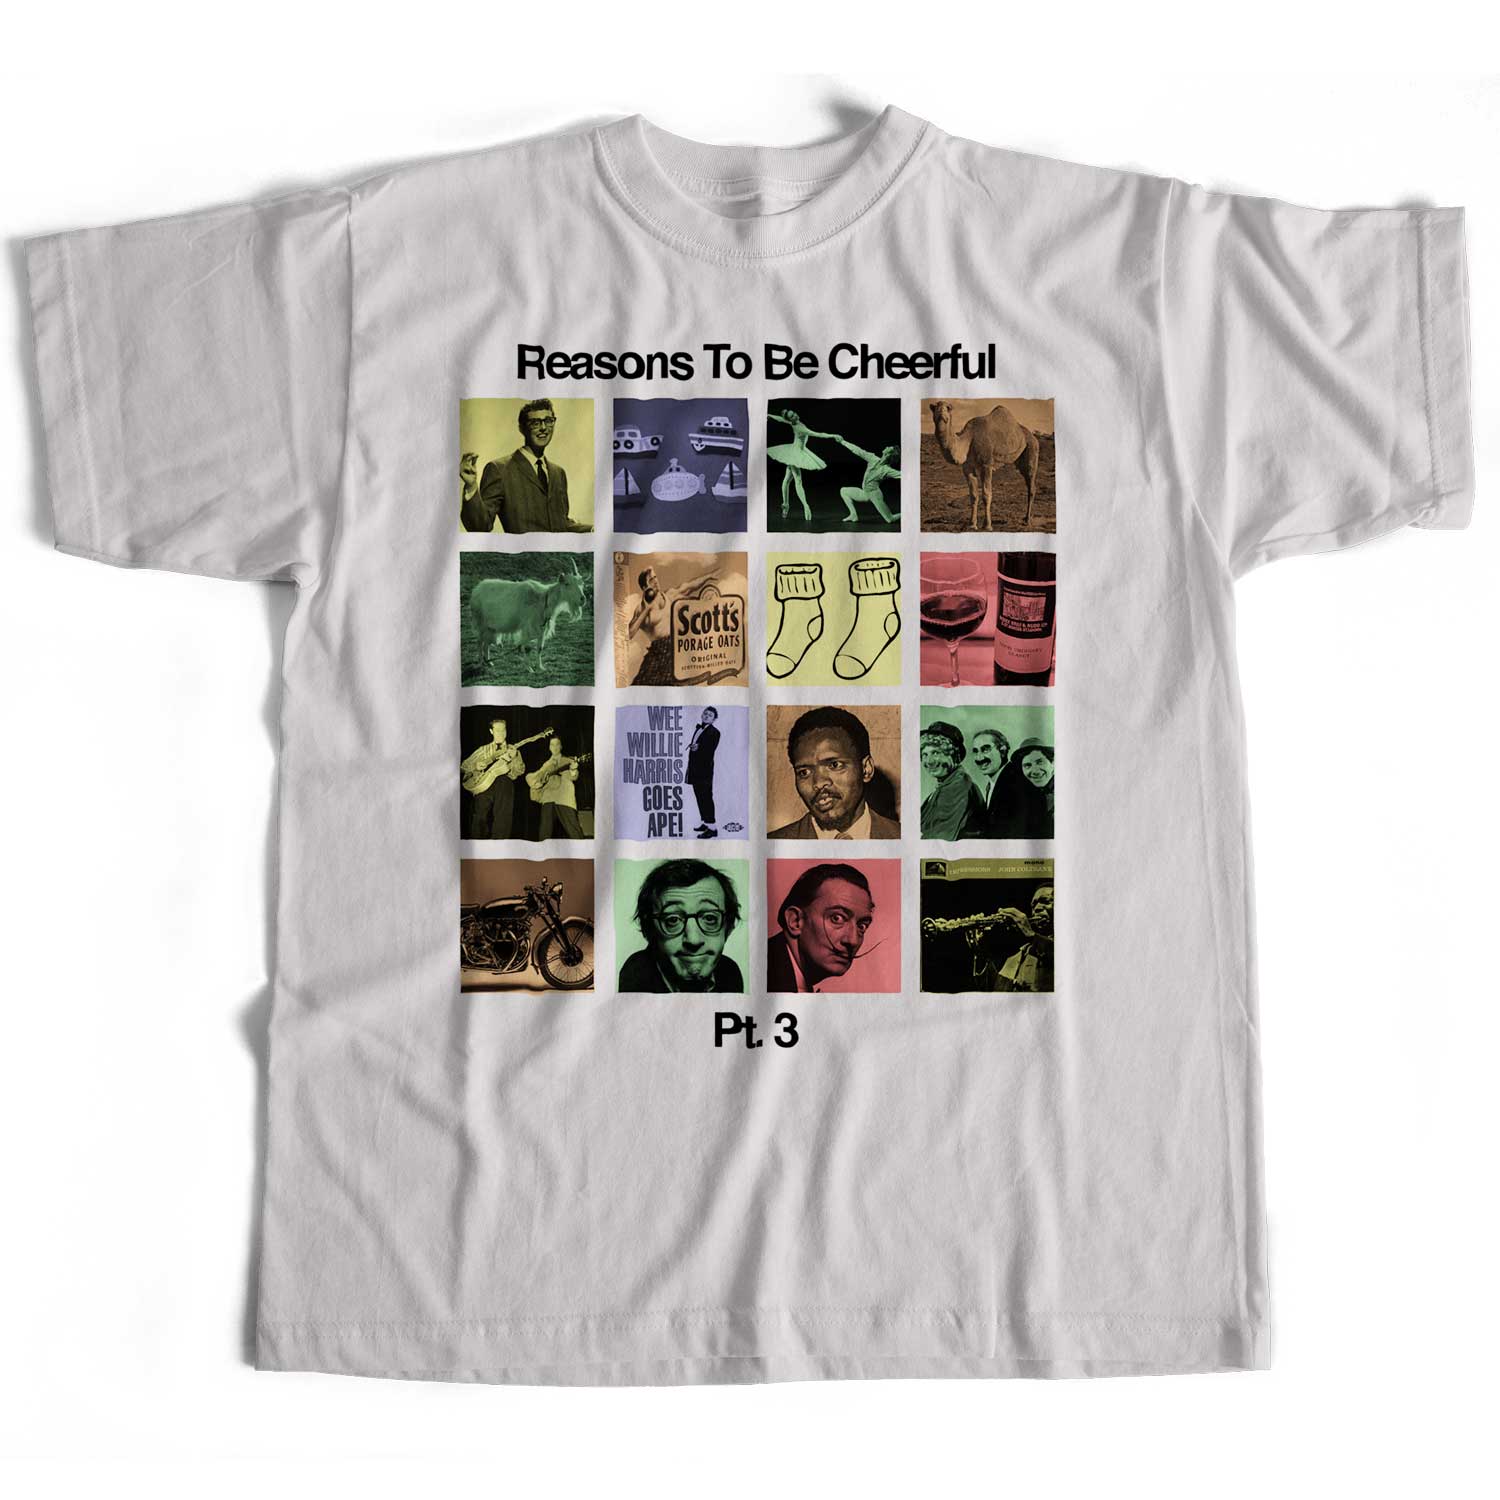 Inspired by Ian Dury T-Shirt - Reasons To Be Cheerful Pt. 3 Pictures